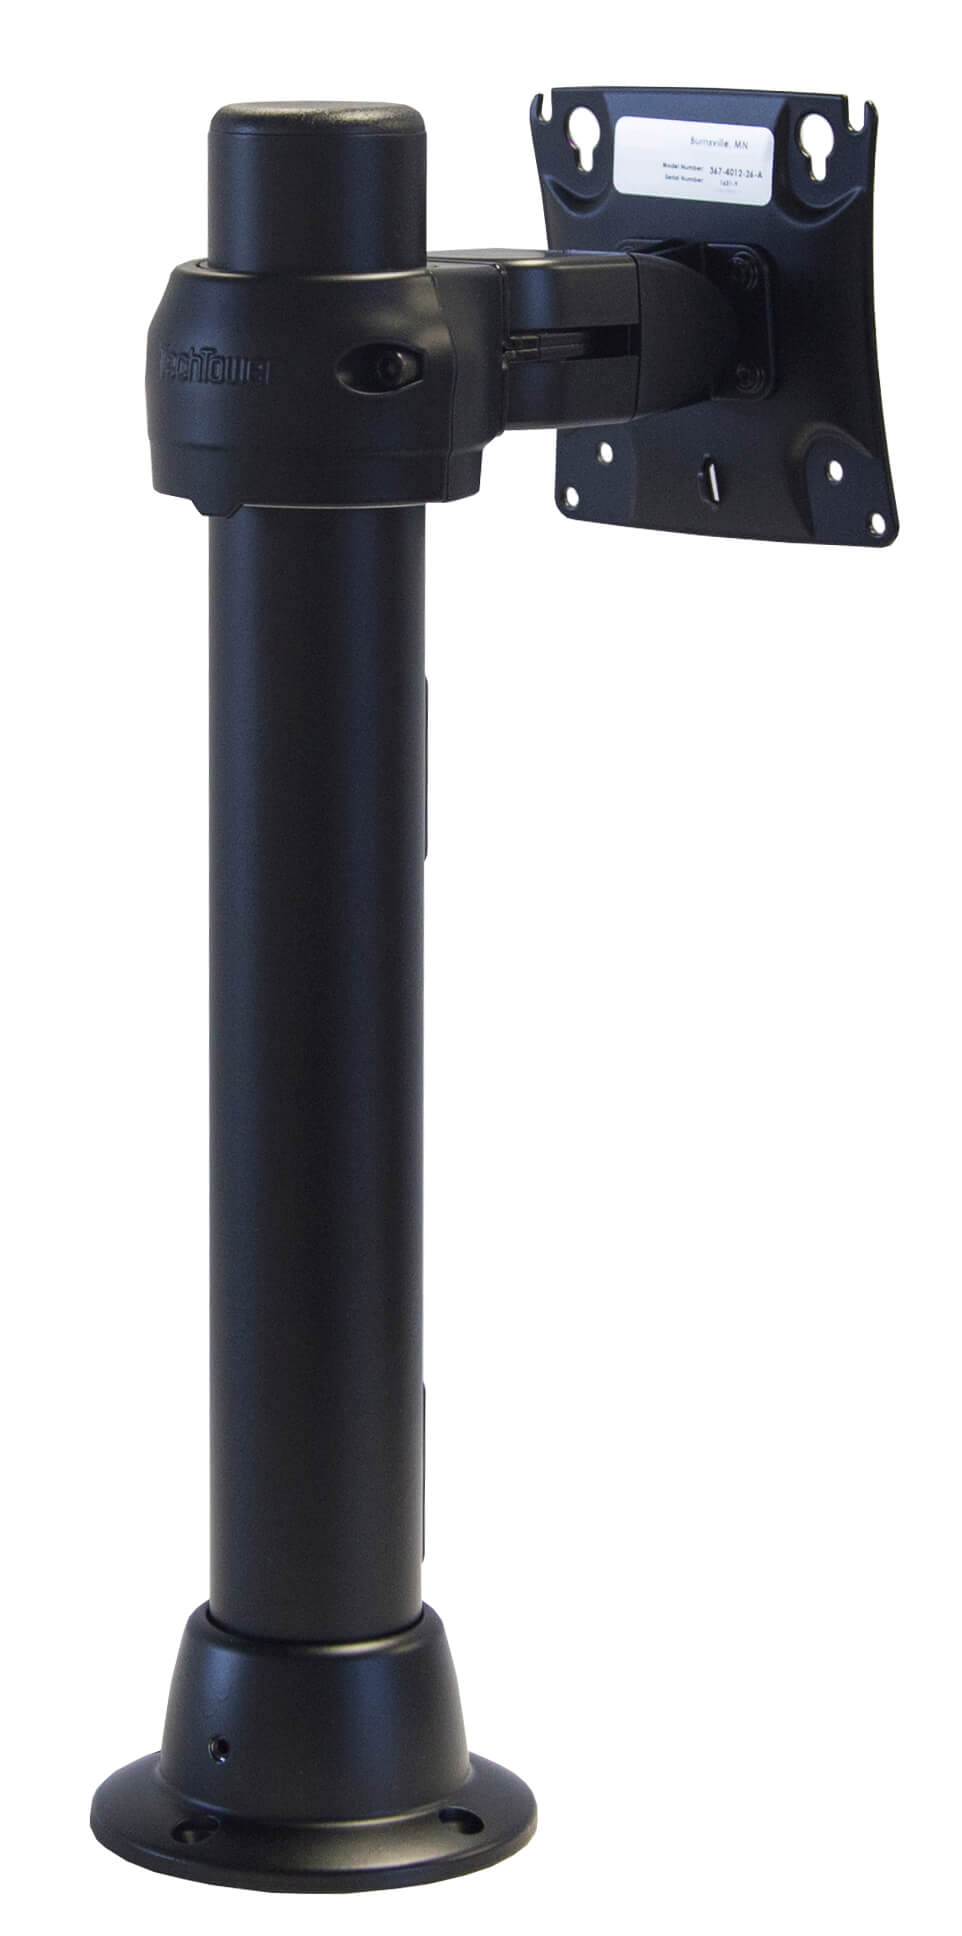 TechTower Pre-Configuration, Grommet Base with 16″ Pole, Double Pivot Monitor Mount on Rotating Clamp